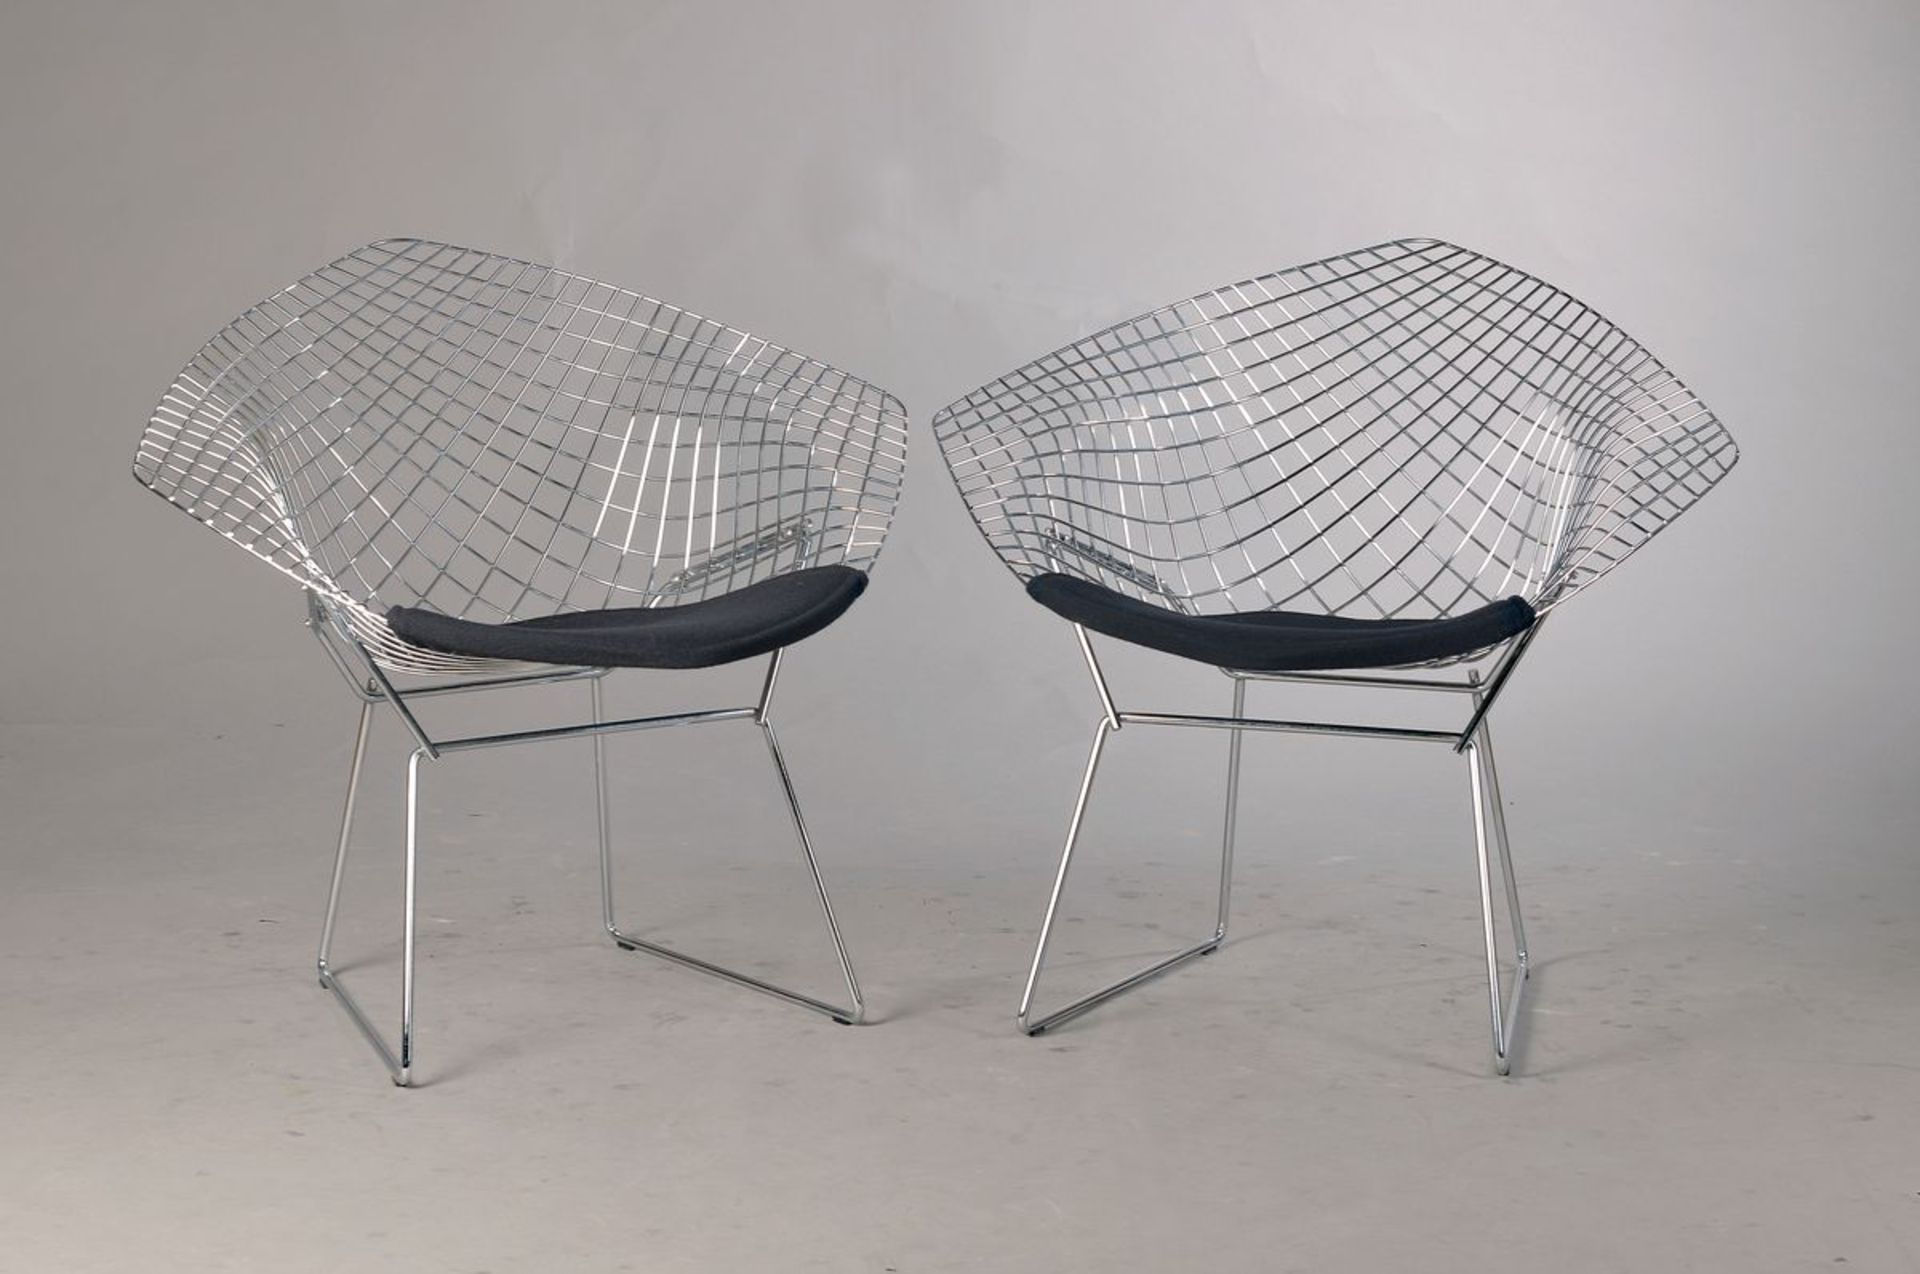 two Diamond Chairs, designed by Harry Bertoia 1950/52, execution: beginning 1990s, chromed steel